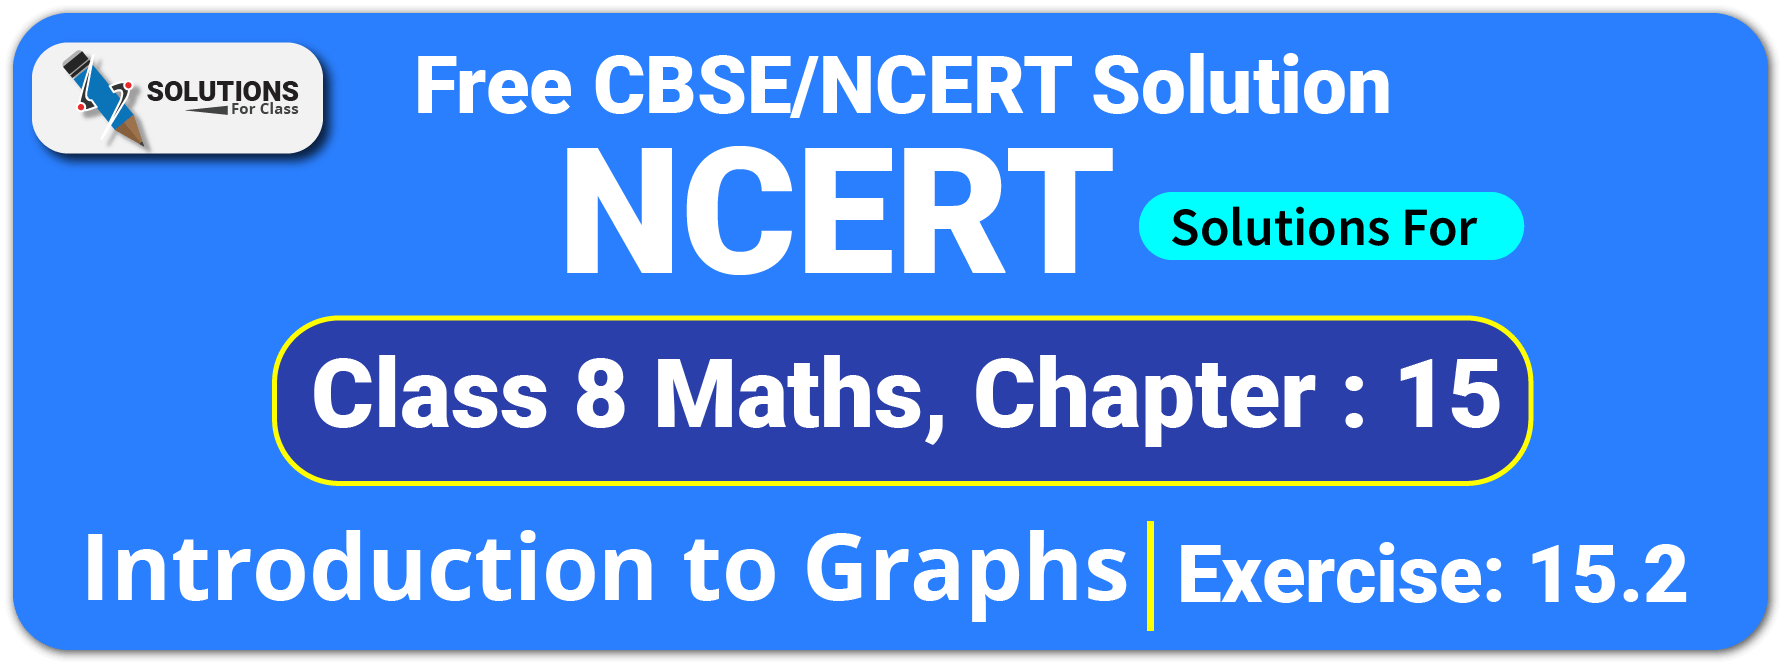 NCERT Solutions For Class 8 Chapter 15, Introduction to Graphs, Exercise15.2